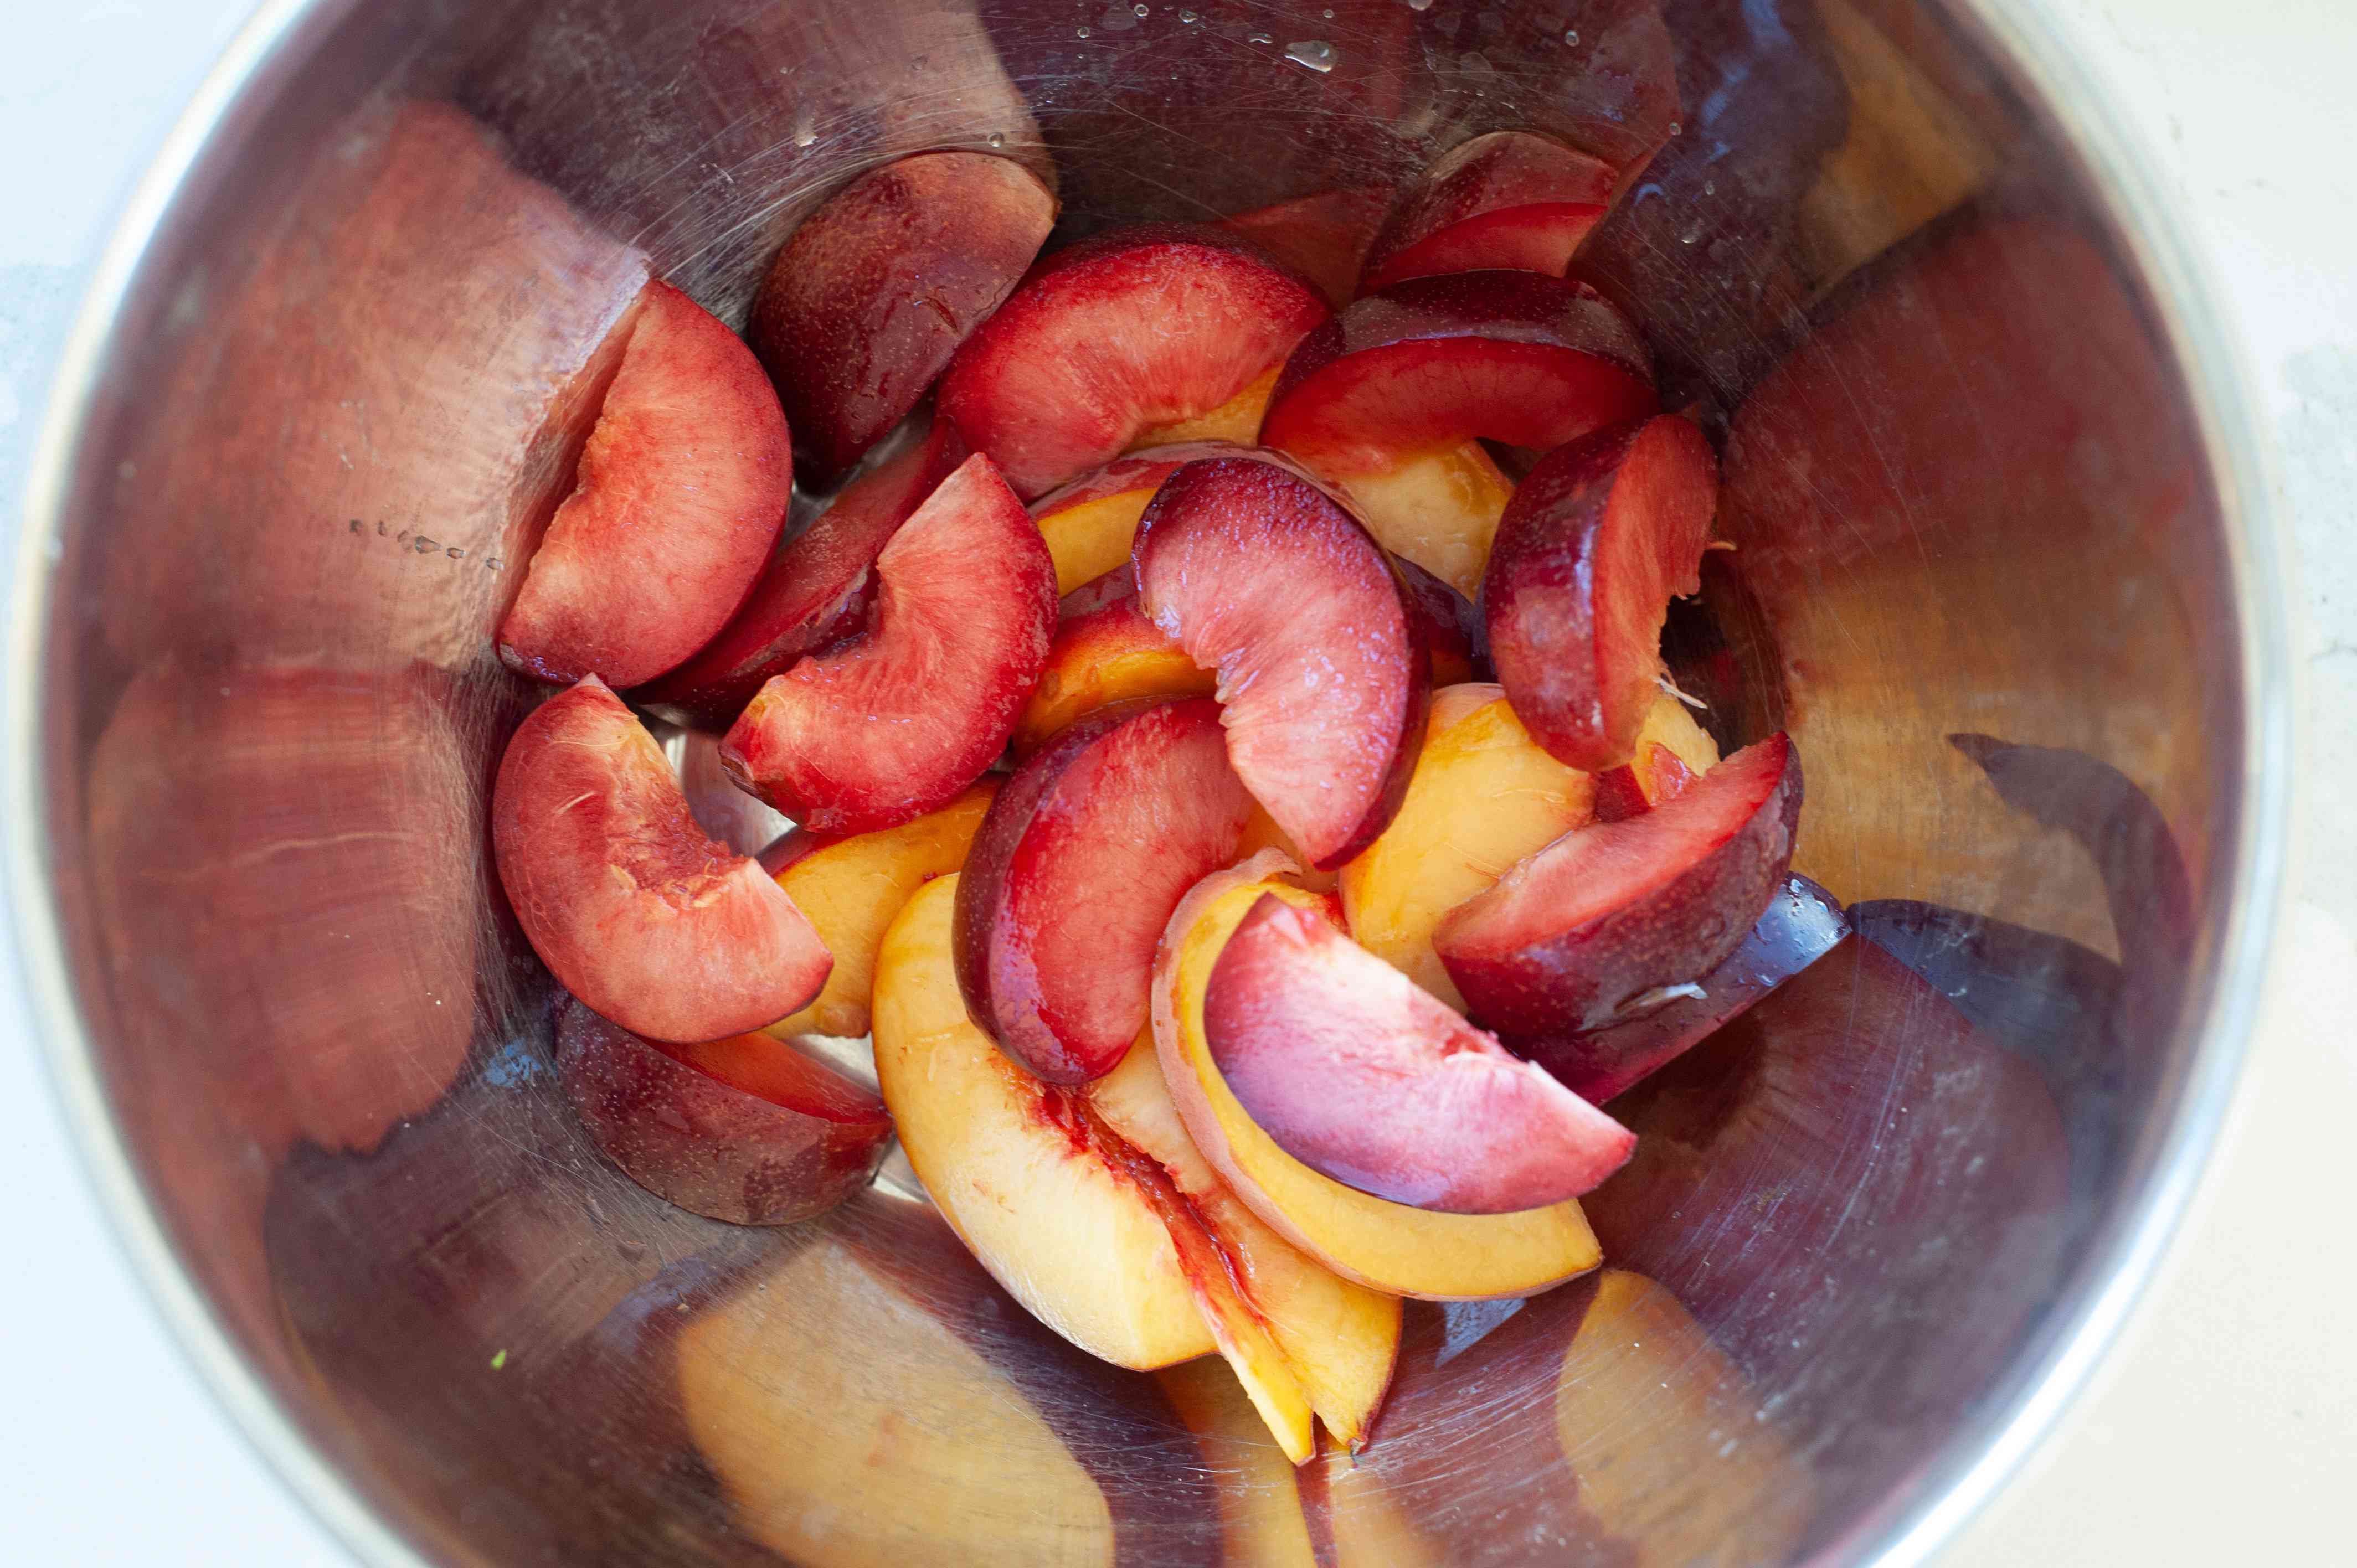 Plums and peaches cut into wedges and set in a bowl to make a summer-y salad with stone fruit and frisée.